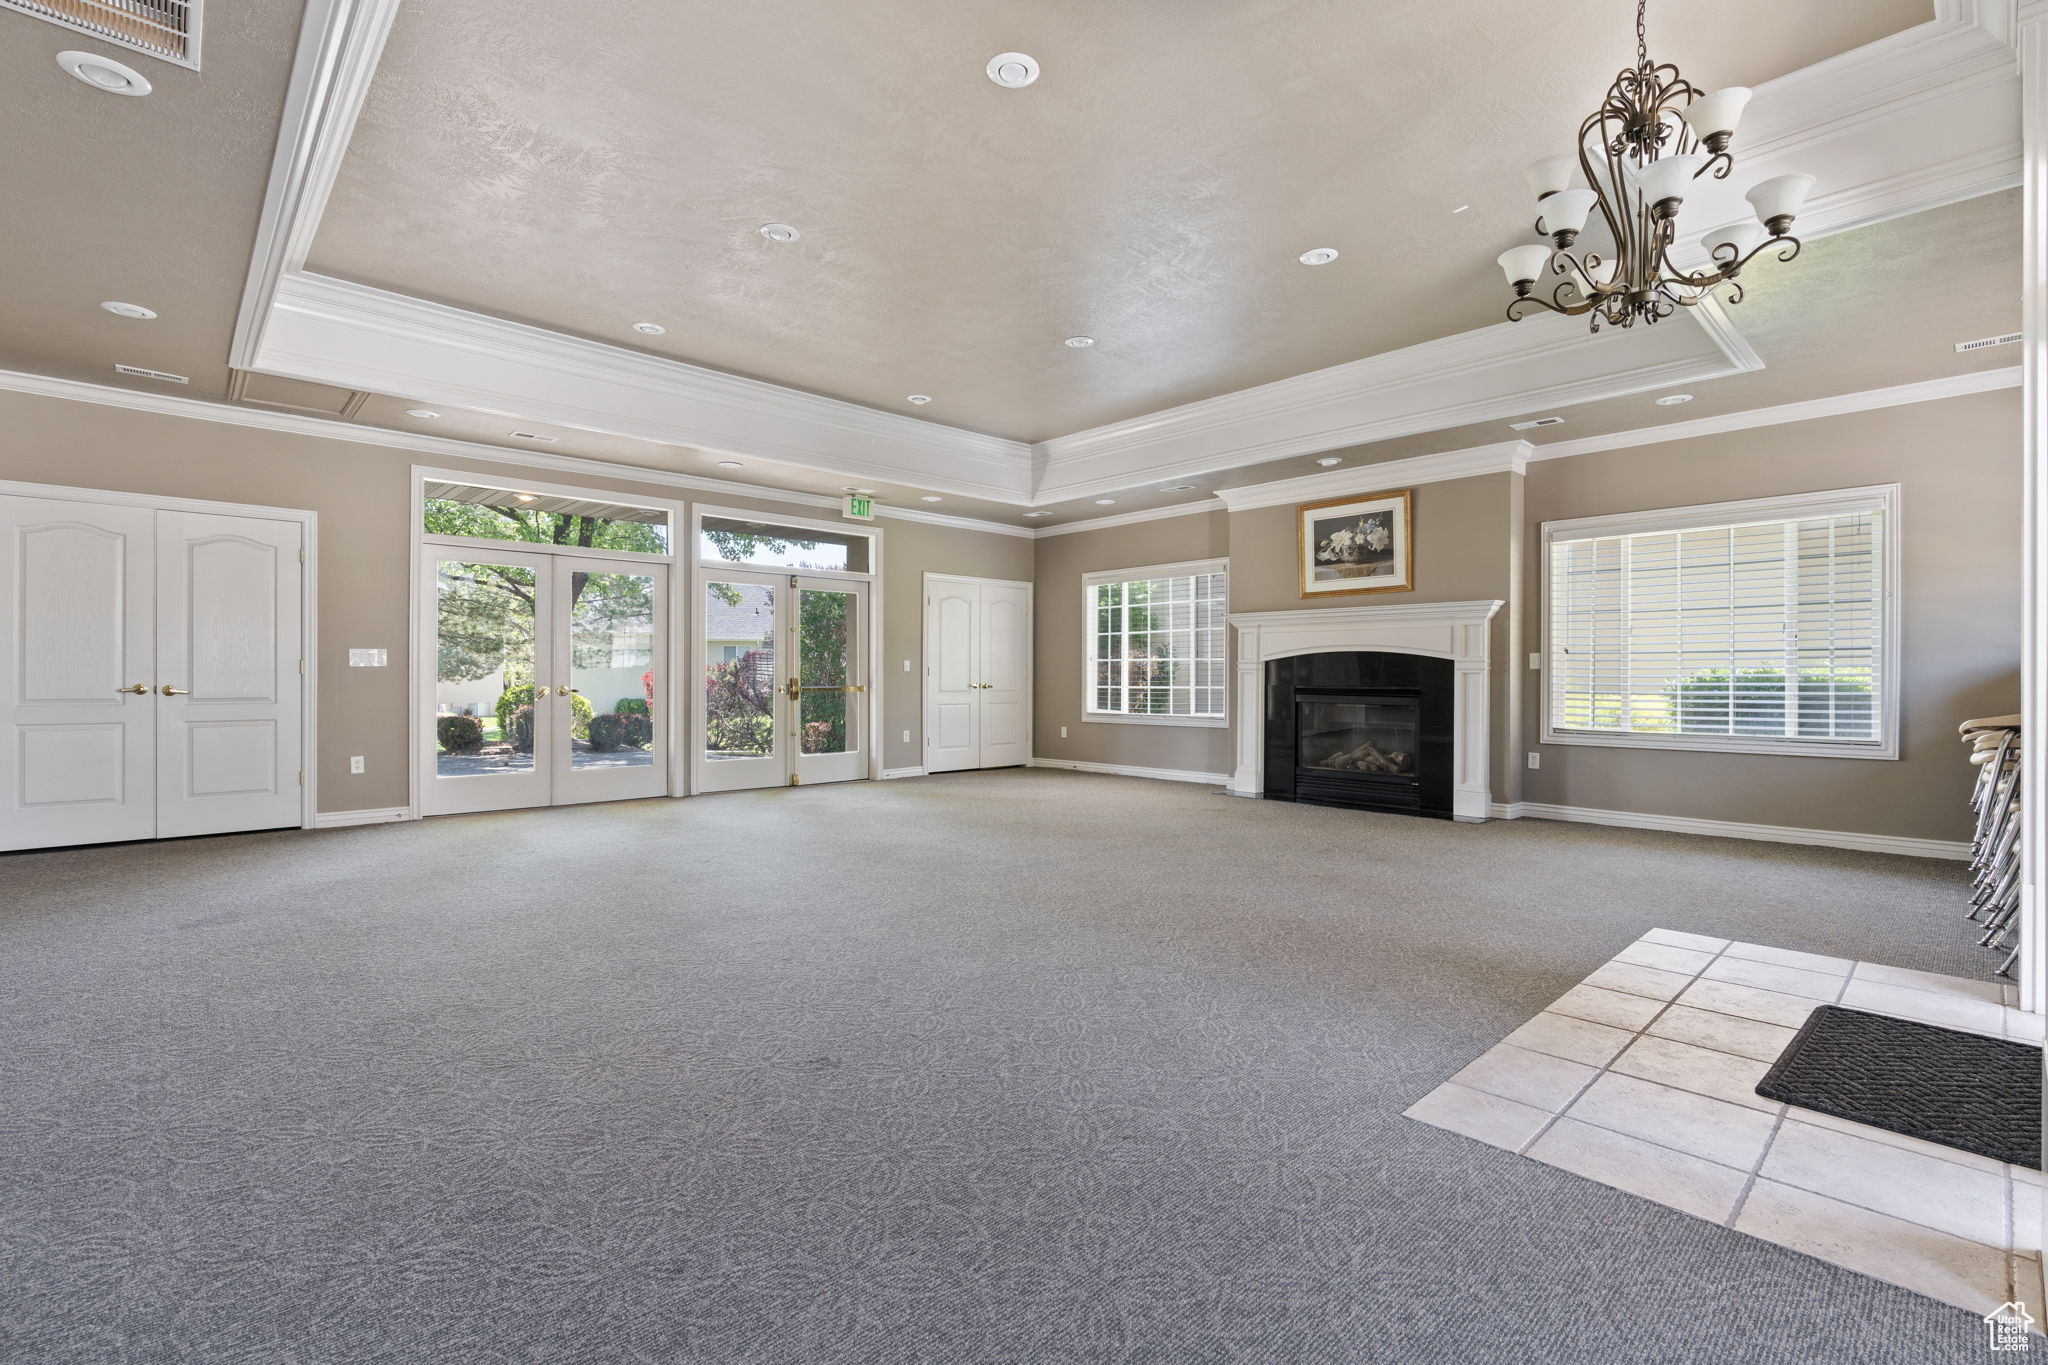 Clubhouse meeting  room featuring a raised ceiling, carpet flooring, crown molding, french doors, and an inviting chandelier